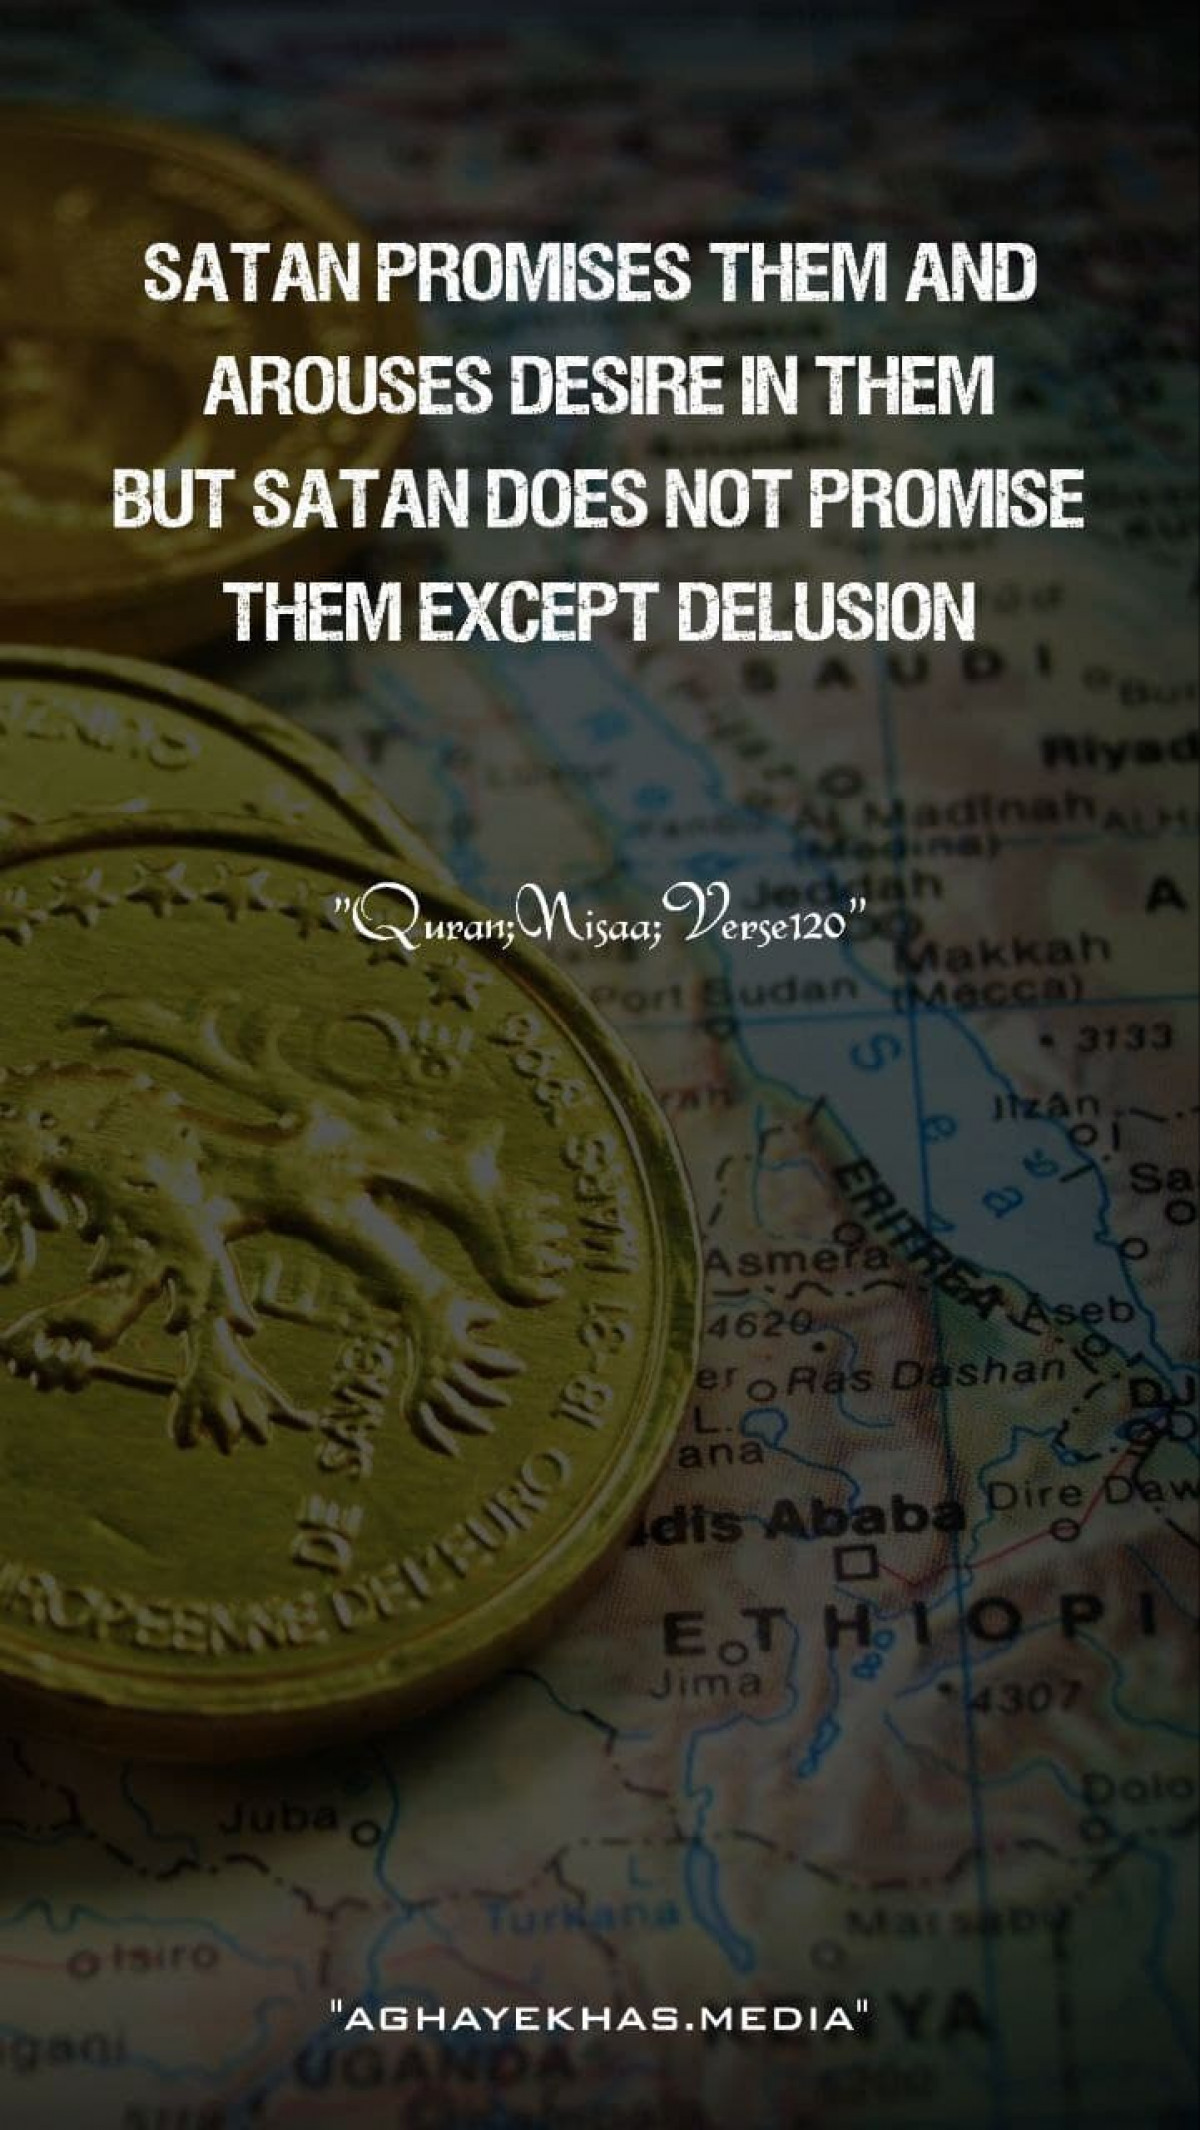 SATAN PROMISES THEM AND AROUSES DESIRE IN THEM